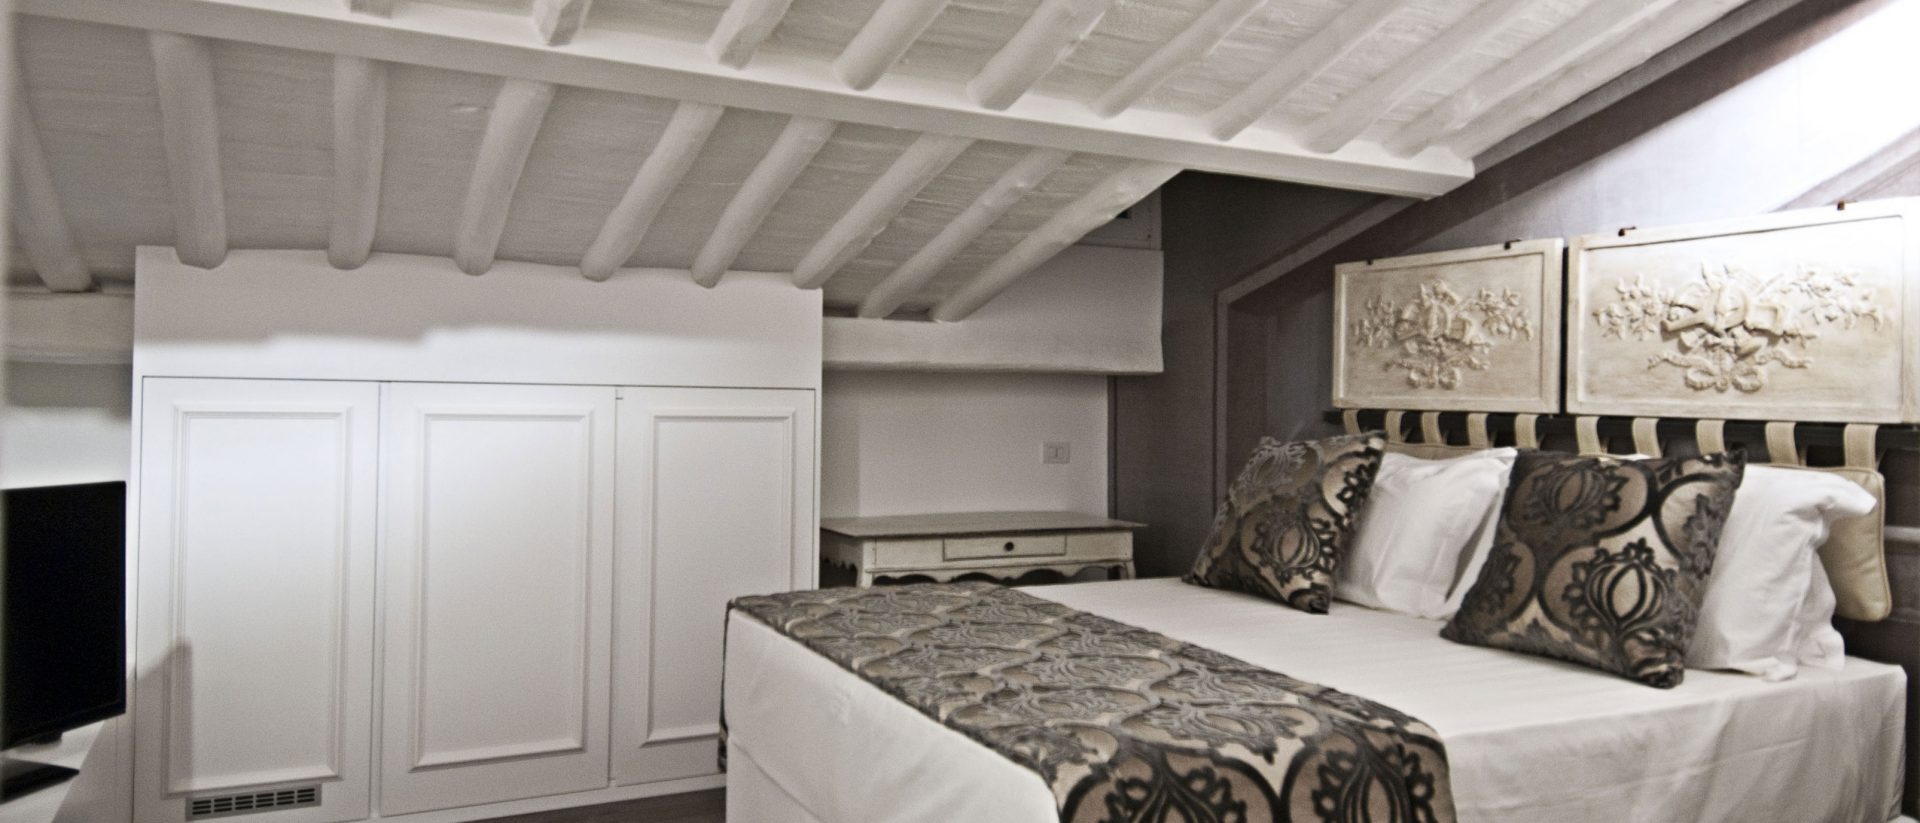 BDB Luxury Rooms Trastevere Torre | Camere di lusso a Roma centro in Trastevere